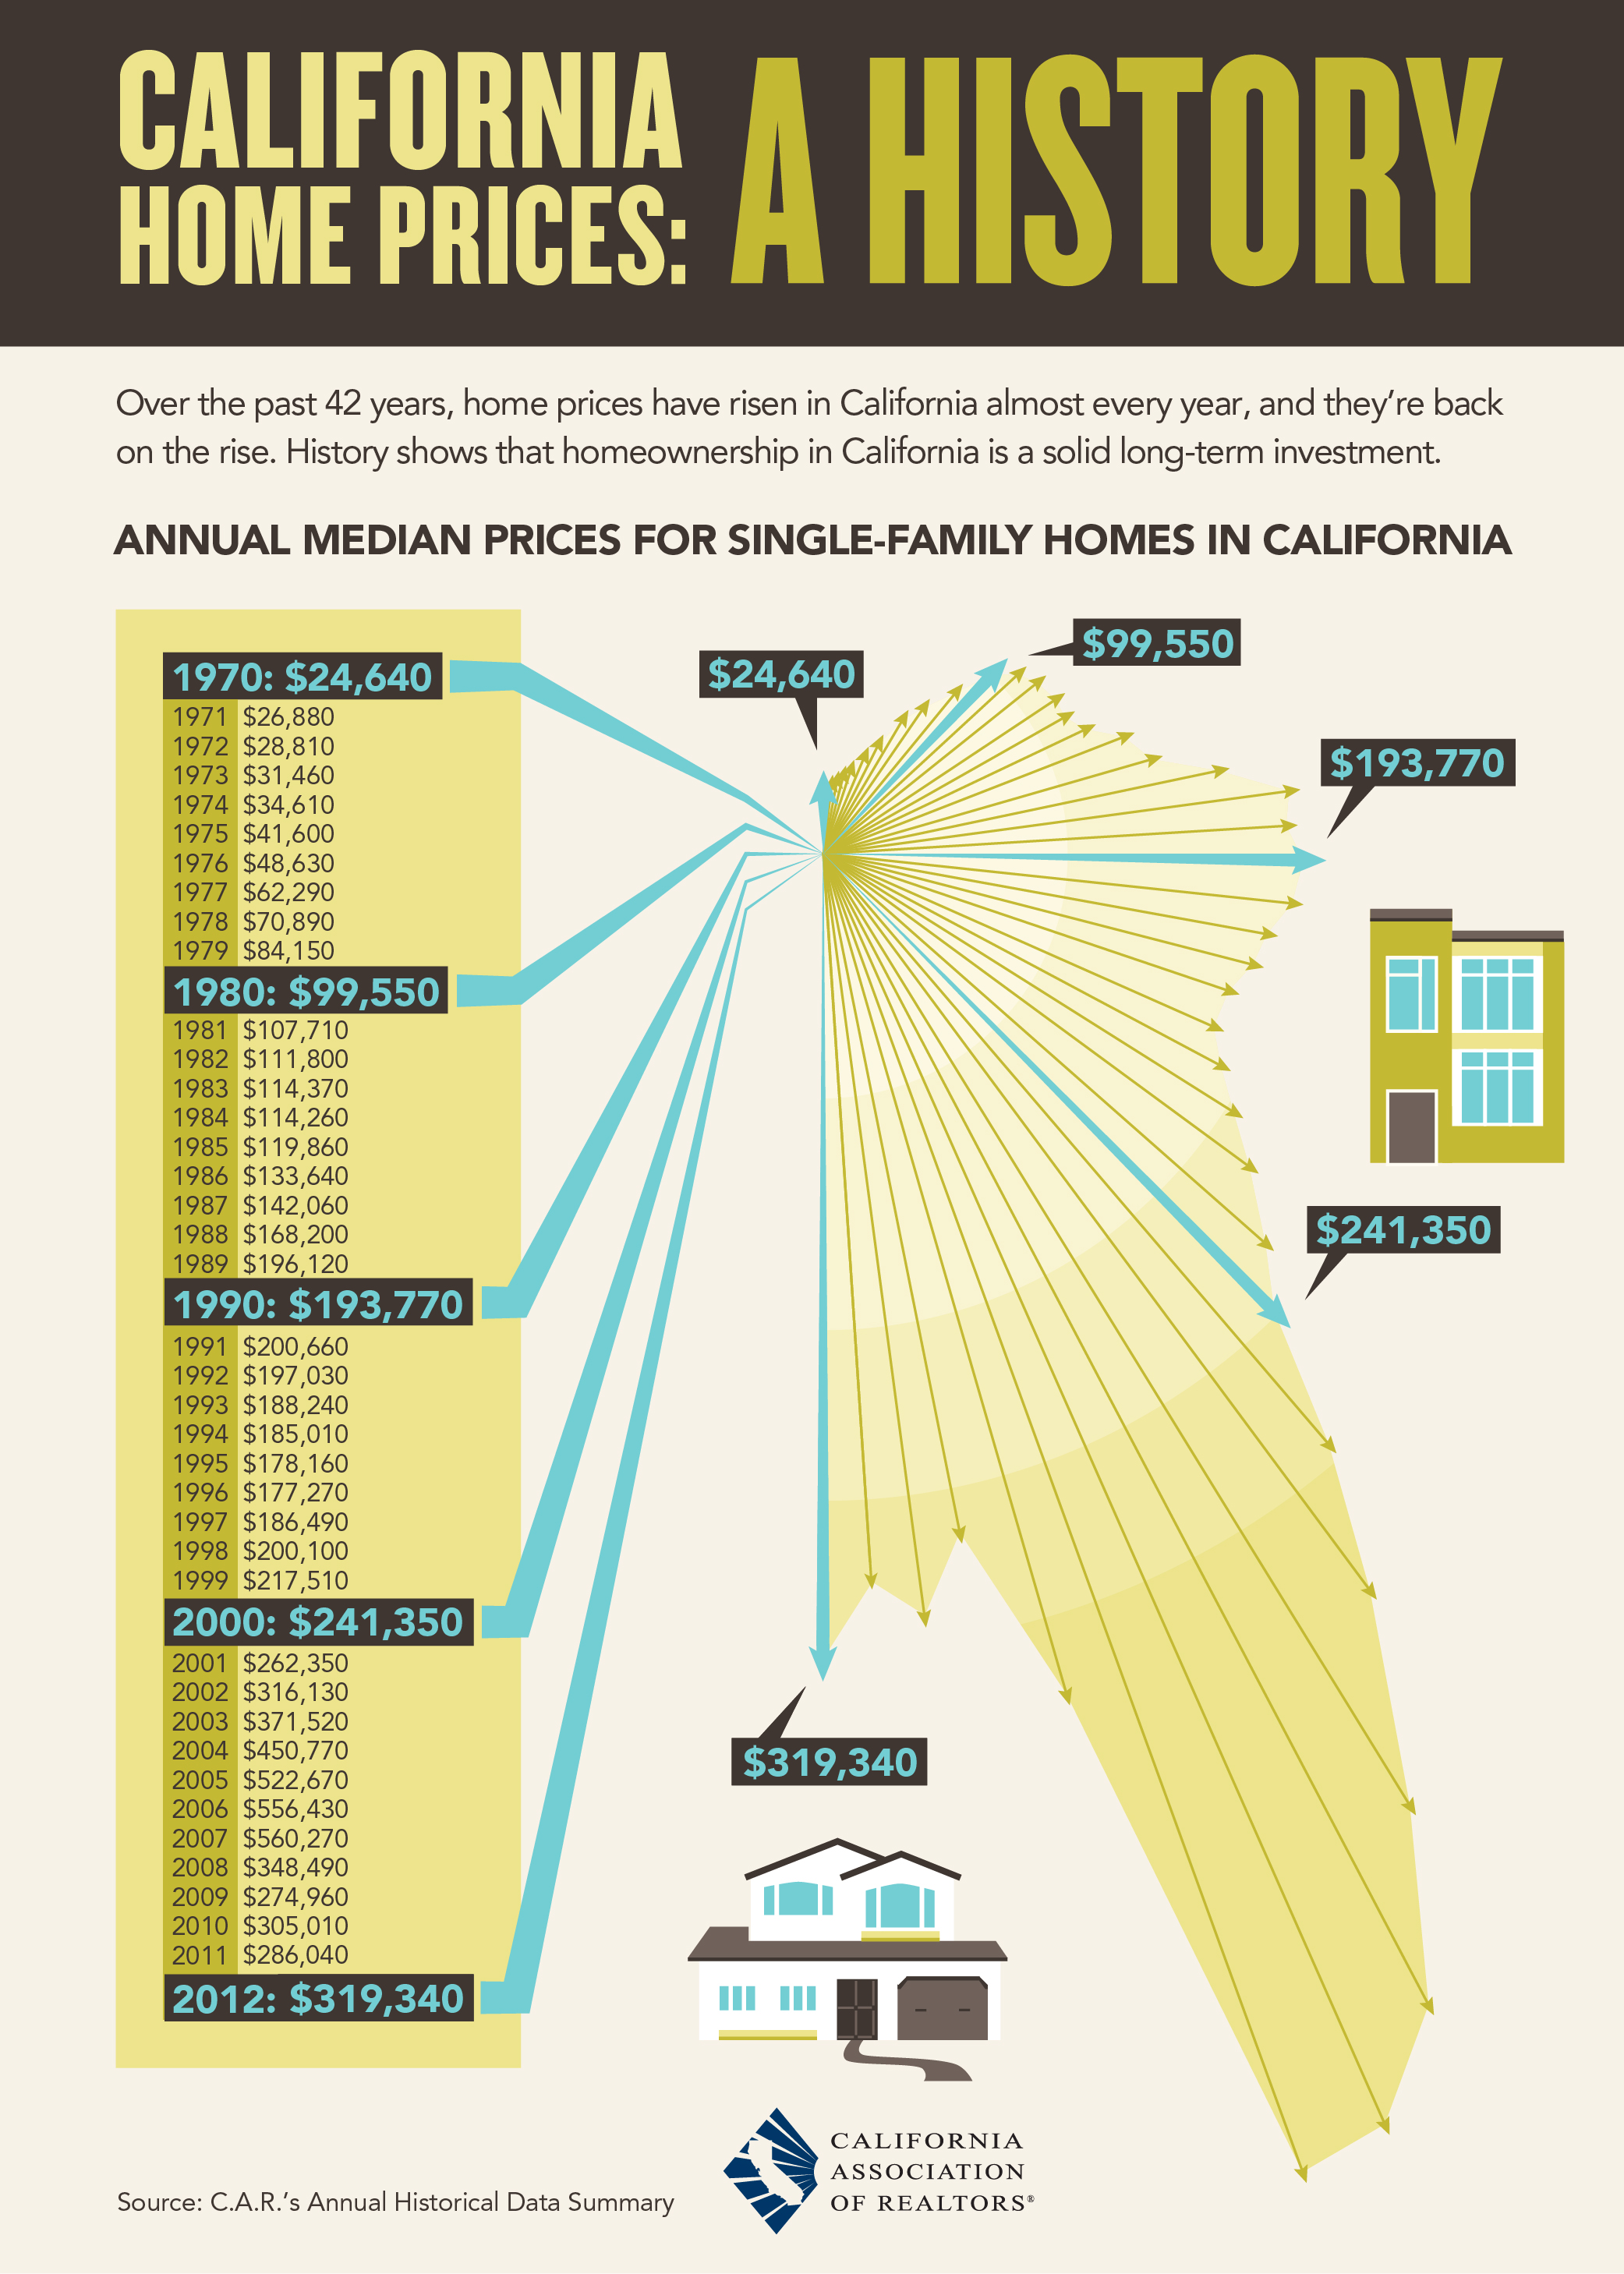 California Home Prices: A History